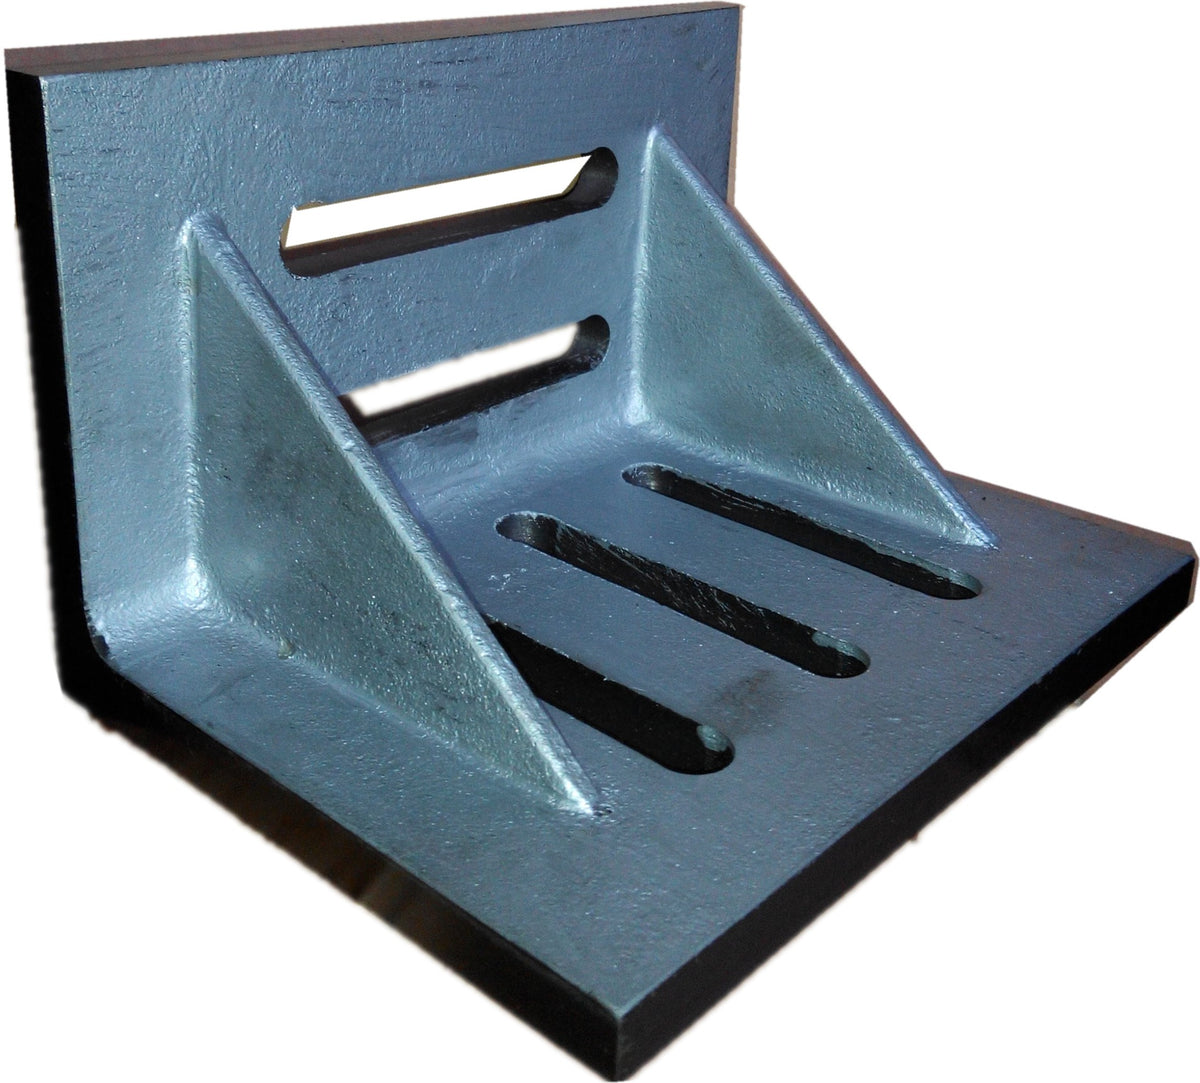 7 X 5-1/2 X 4-1/2" WEBBED SLOTTED ANGLE PLATE